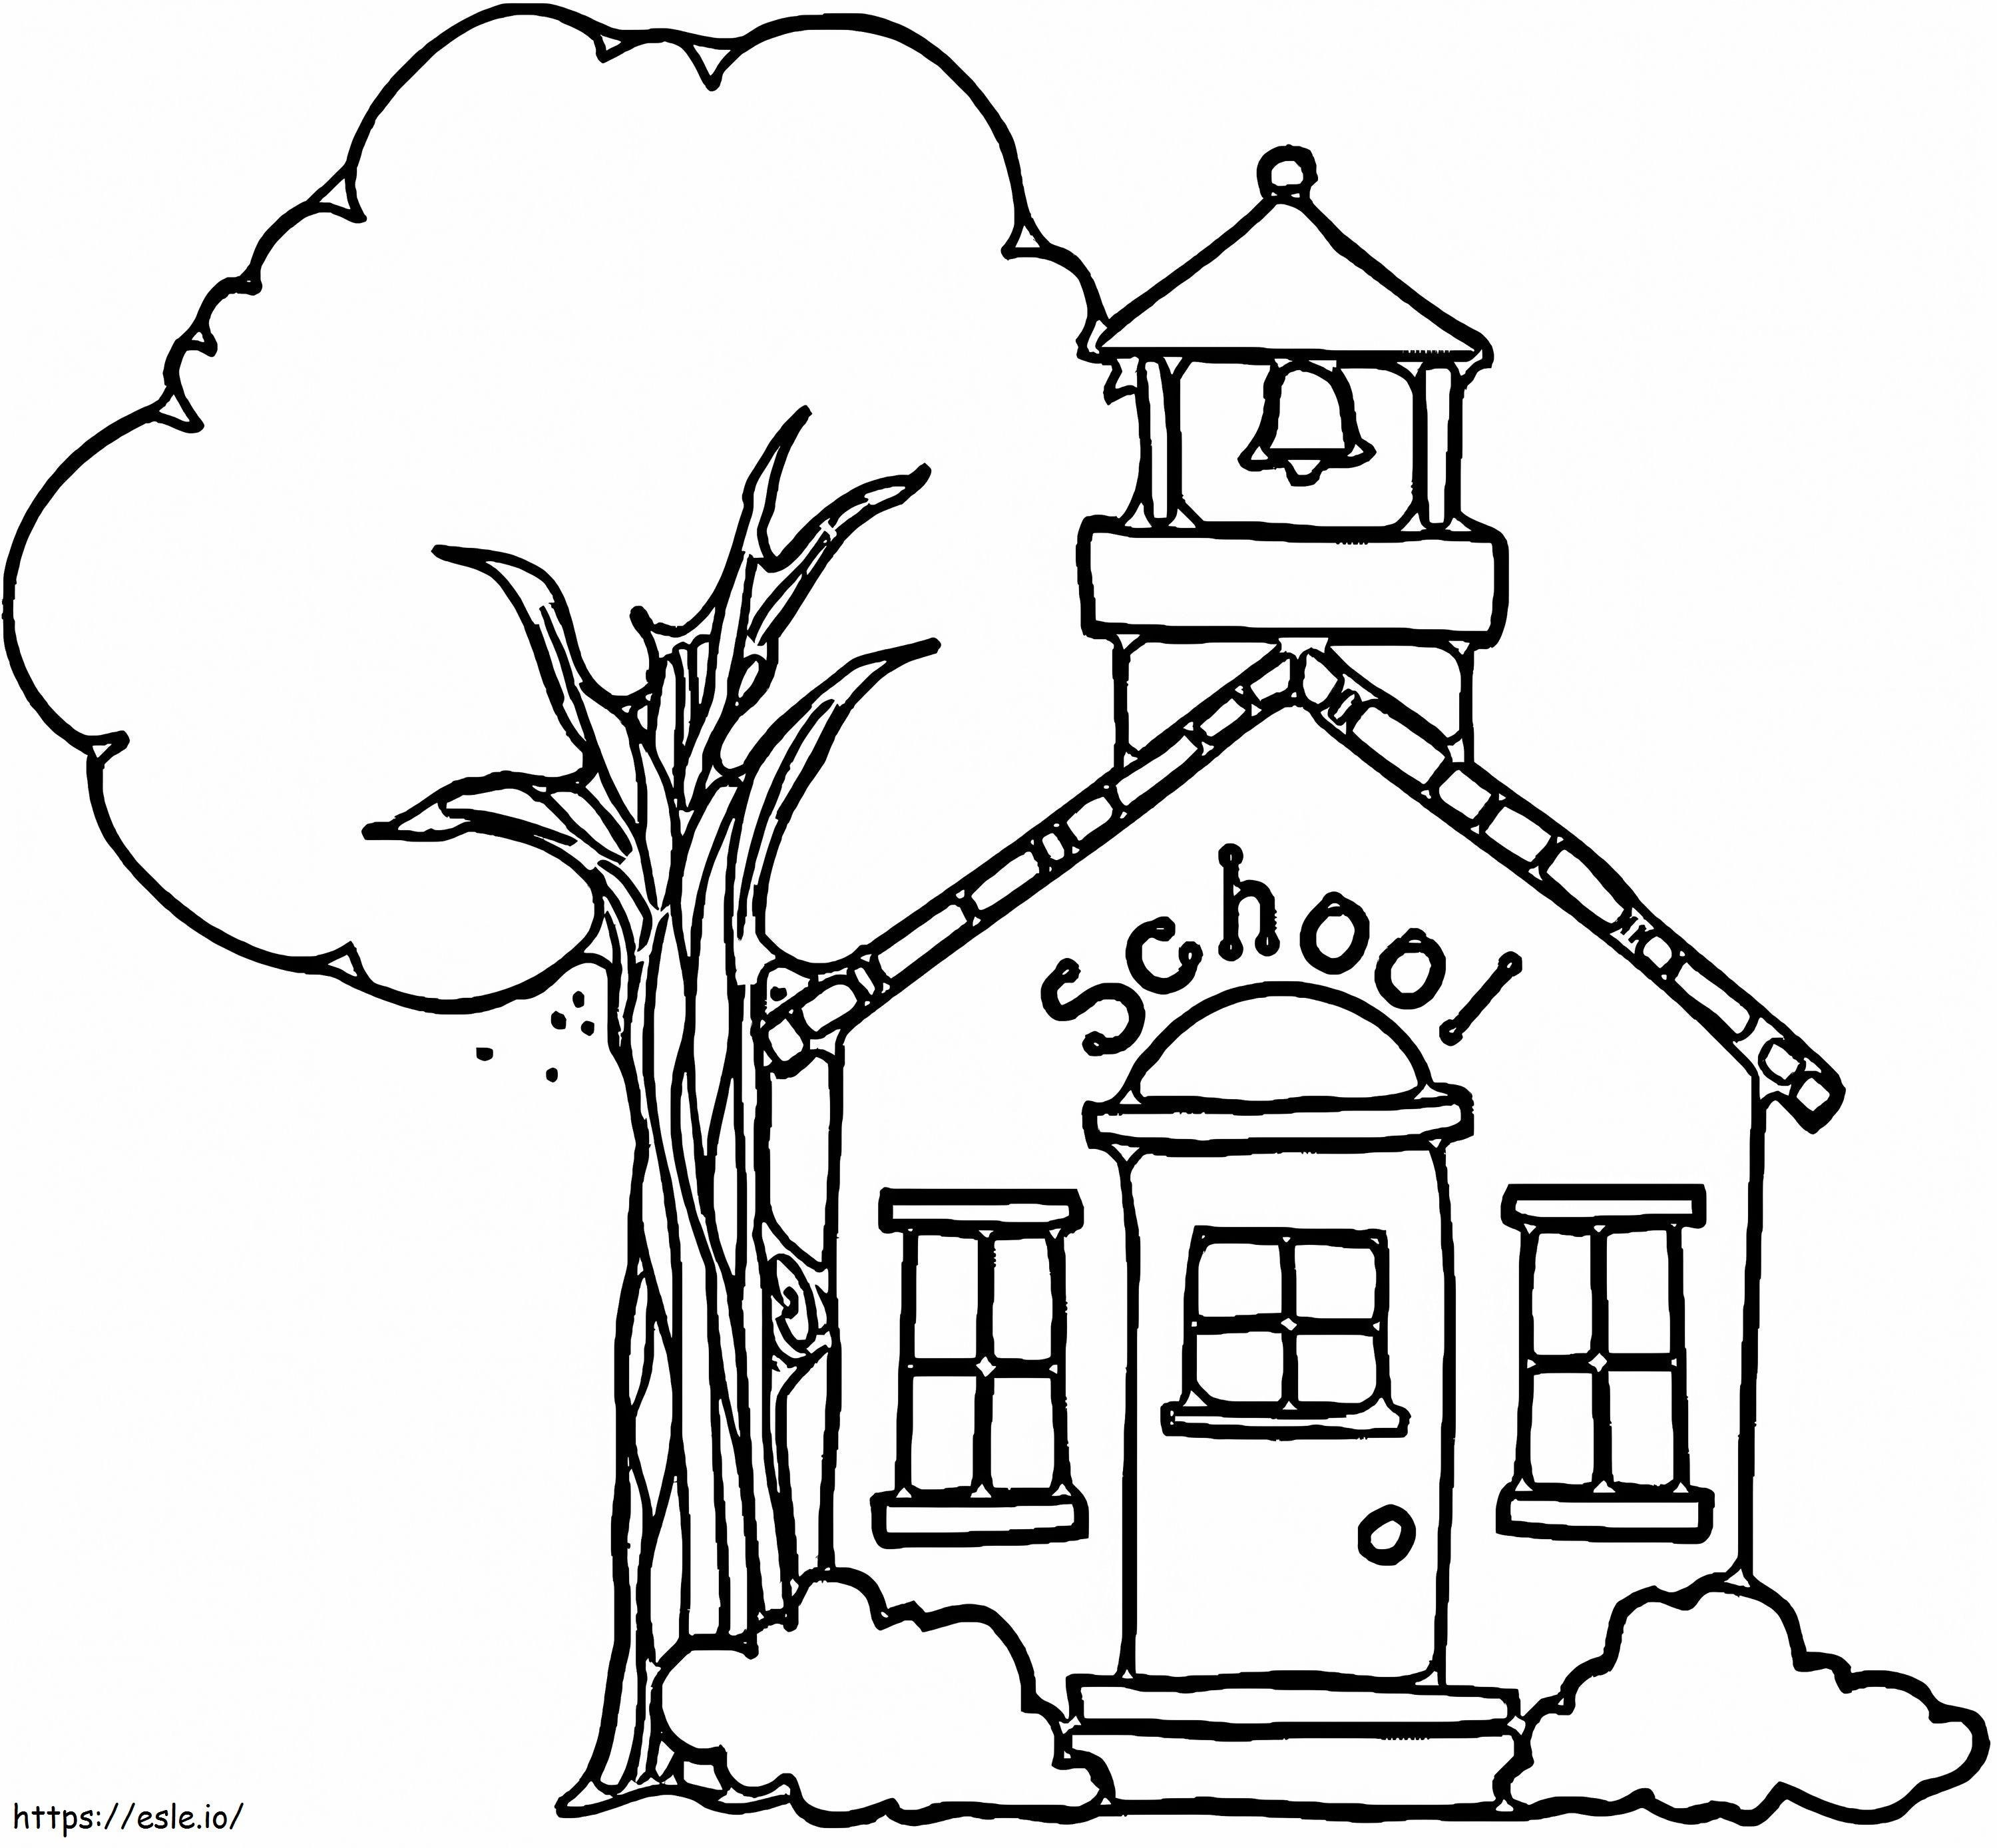 School With Tree coloring page